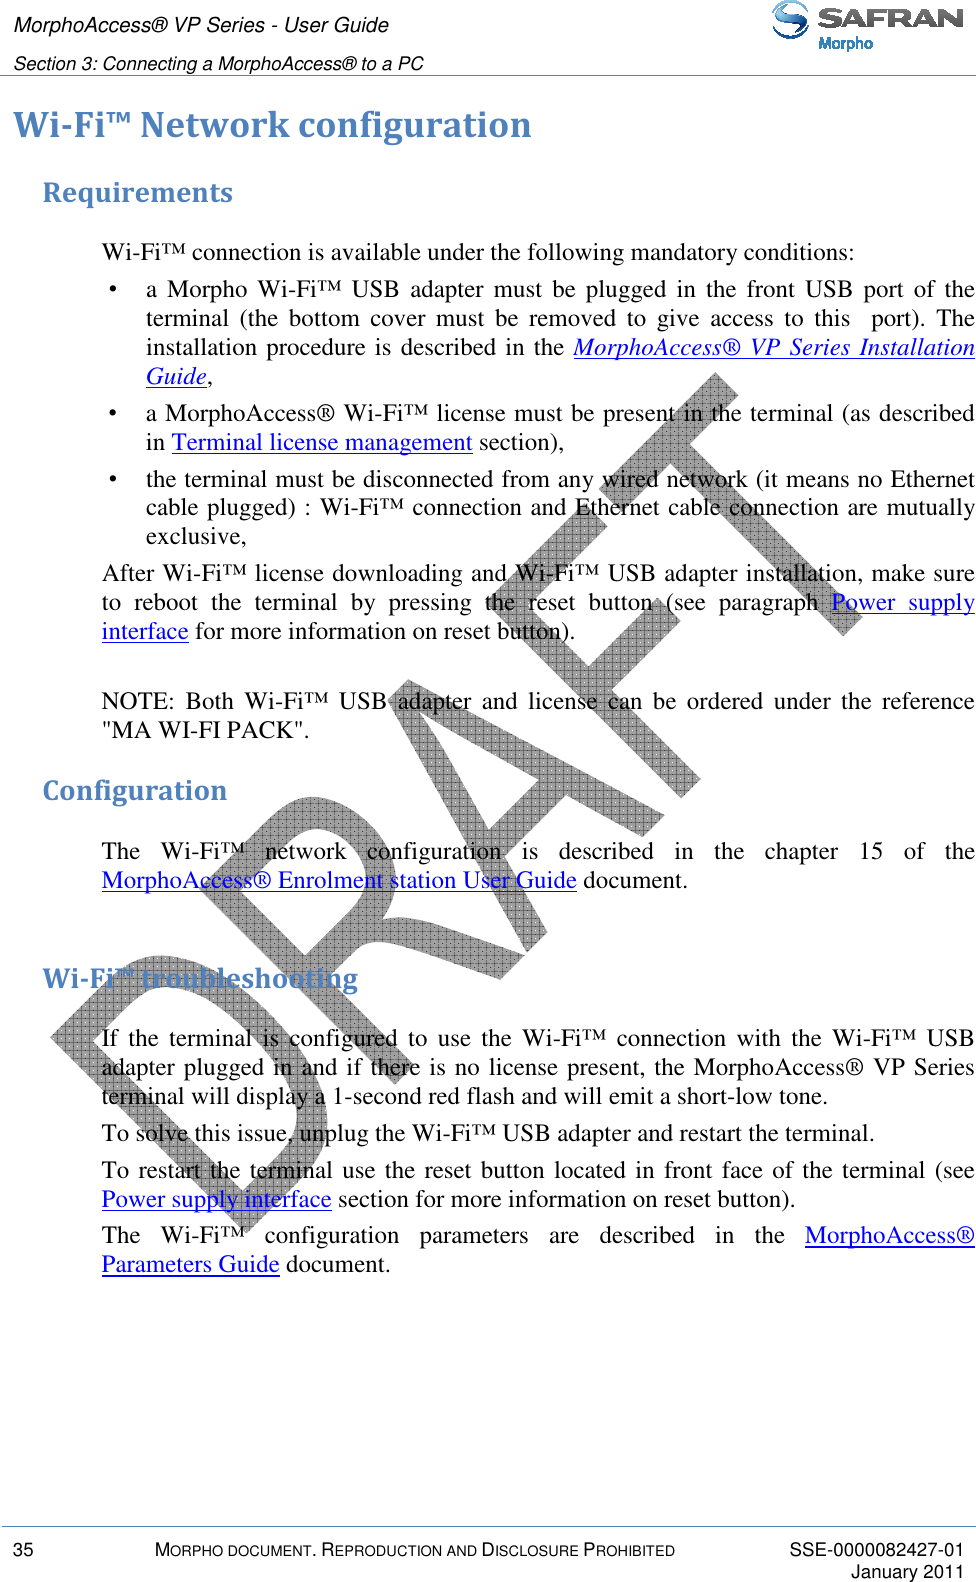 MorphoAccess® VP Series - User Guide   Section 3: Connecting a MorphoAccess® to a PC         35  MORPHO DOCUMENT. REPRODUCTION AND DISCLOSURE PROHIBITED  SSE-0000082427-01     January 2011  Wi-Fi™ Network configuration Requirements Wi-Fi™ connection is available under the following mandatory conditions:  •  a Morpho  Wi-Fi™  USB  adapter must  be  plugged  in the  front  USB port  of the terminal  (the  bottom  cover  must  be  removed  to  give  access  to  this    port).  The installation procedure is described in the MorphoAccess® VP Series Installation Guide,  •  a MorphoAccess® Wi-Fi™ license must be present in the terminal (as described in Terminal license management section),  •  the terminal must be disconnected from any wired network (it means no Ethernet cable plugged) : Wi-Fi™ connection and Ethernet cable connection are mutually exclusive,  After Wi-Fi™ license downloading and Wi-Fi™ USB adapter installation, make sure to  reboot  the  terminal  by  pressing  the  reset  button  (see  paragraph  Power  supply interface for more information on reset button).  NOTE:  Both  Wi-Fi™  USB  adapter  and  license  can  be  ordered  under  the  reference &quot;MA WI-FI PACK&quot;. Configuration The  Wi-Fi™  network  configuration  is  described  in  the  chapter  15  of  the MorphoAccess® Enrolment station User Guide document.  Wi-Fi™ troubleshooting If  the  terminal  is  configured  to  use  the  Wi-Fi™  connection  with  the  Wi-Fi™  USB adapter plugged in and if there is no license present, the MorphoAccess® VP Series terminal will display a 1-second red flash and will emit a short-low tone.  To solve this issue, unplug the Wi-Fi™ USB adapter and restart the terminal. To restart the terminal use the reset button located in front face of the terminal (see Power supply interface section for more information on reset button). The  Wi-Fi™  configuration  parameters  are  described  in  the  MorphoAccess® Parameters Guide document.  